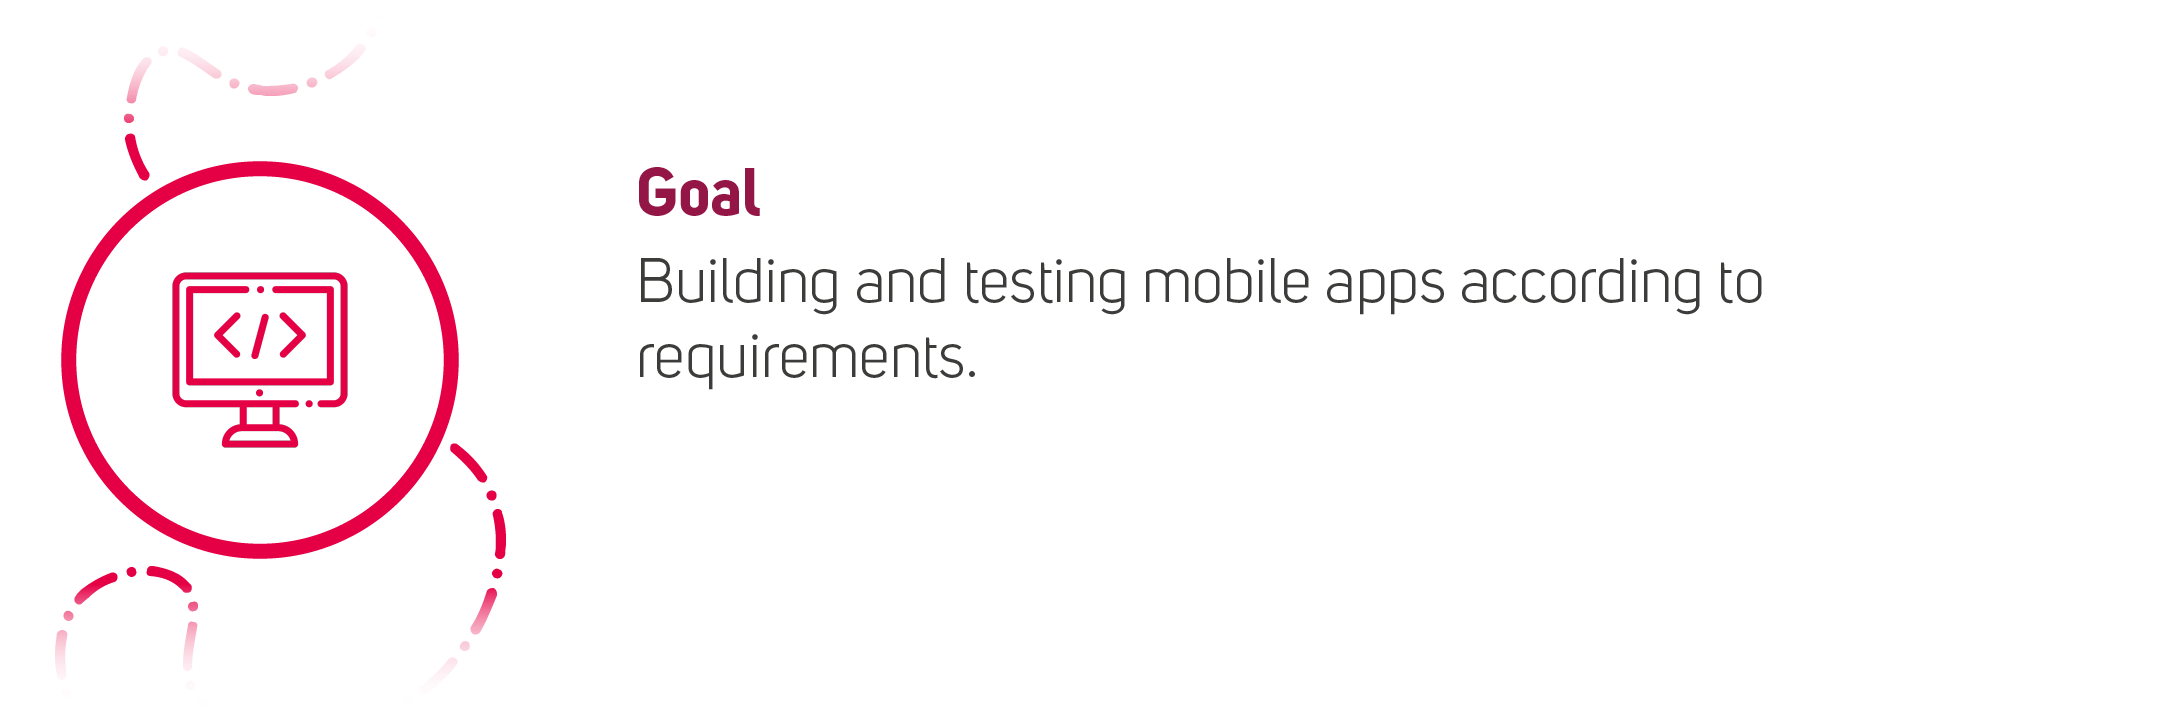 Step 4 in the app development process: Writing code & testing